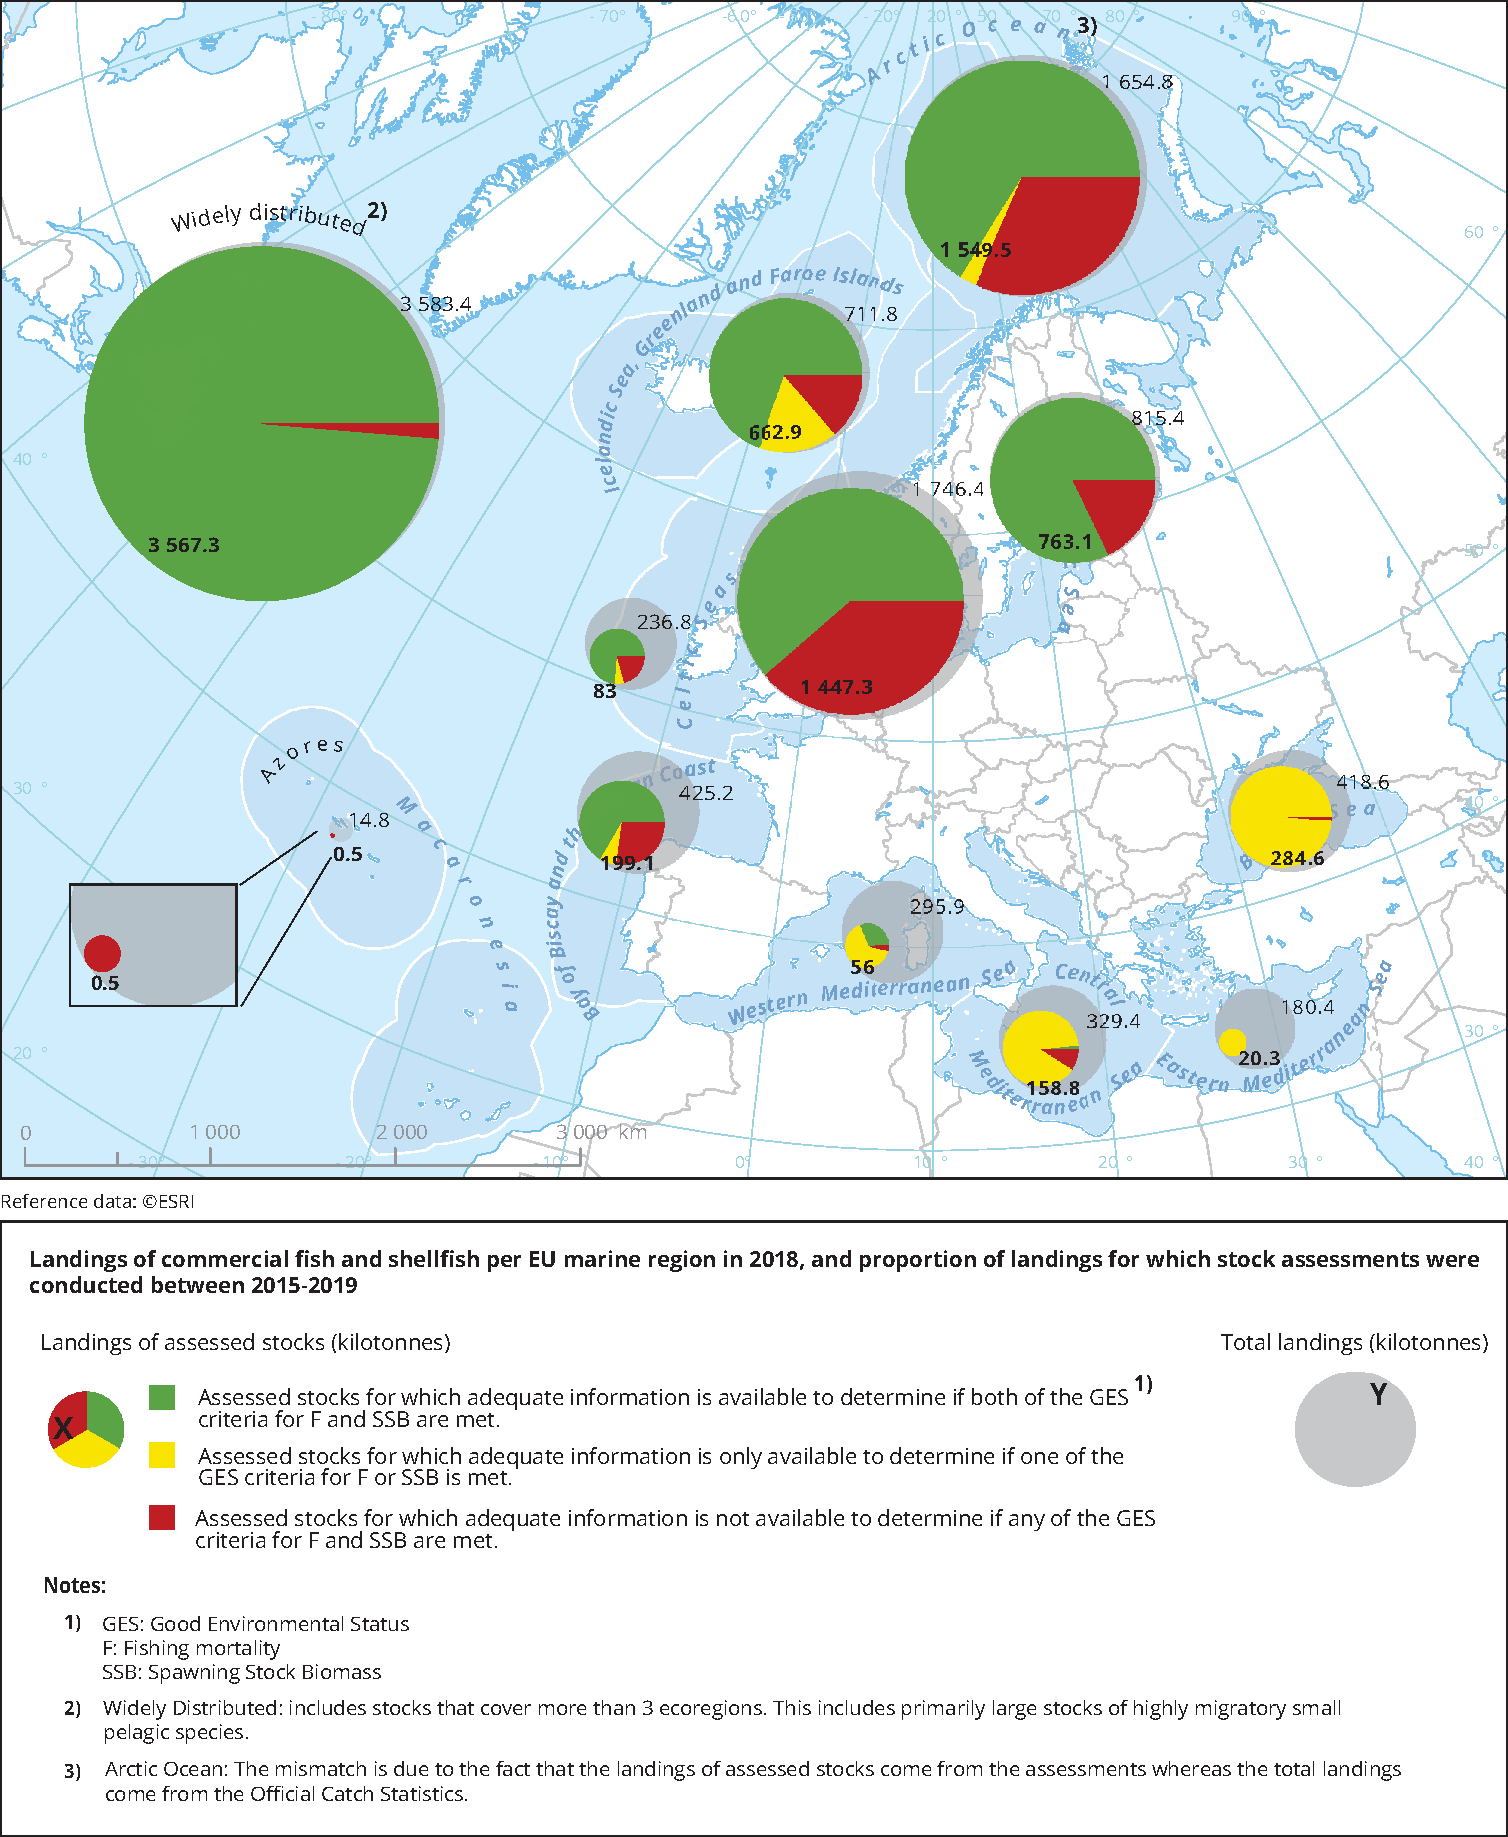  Landings of commercial fish and shellfish per EU marine region in 2018, and proportion of landings for which stock assessments were conducted between 2015-2019